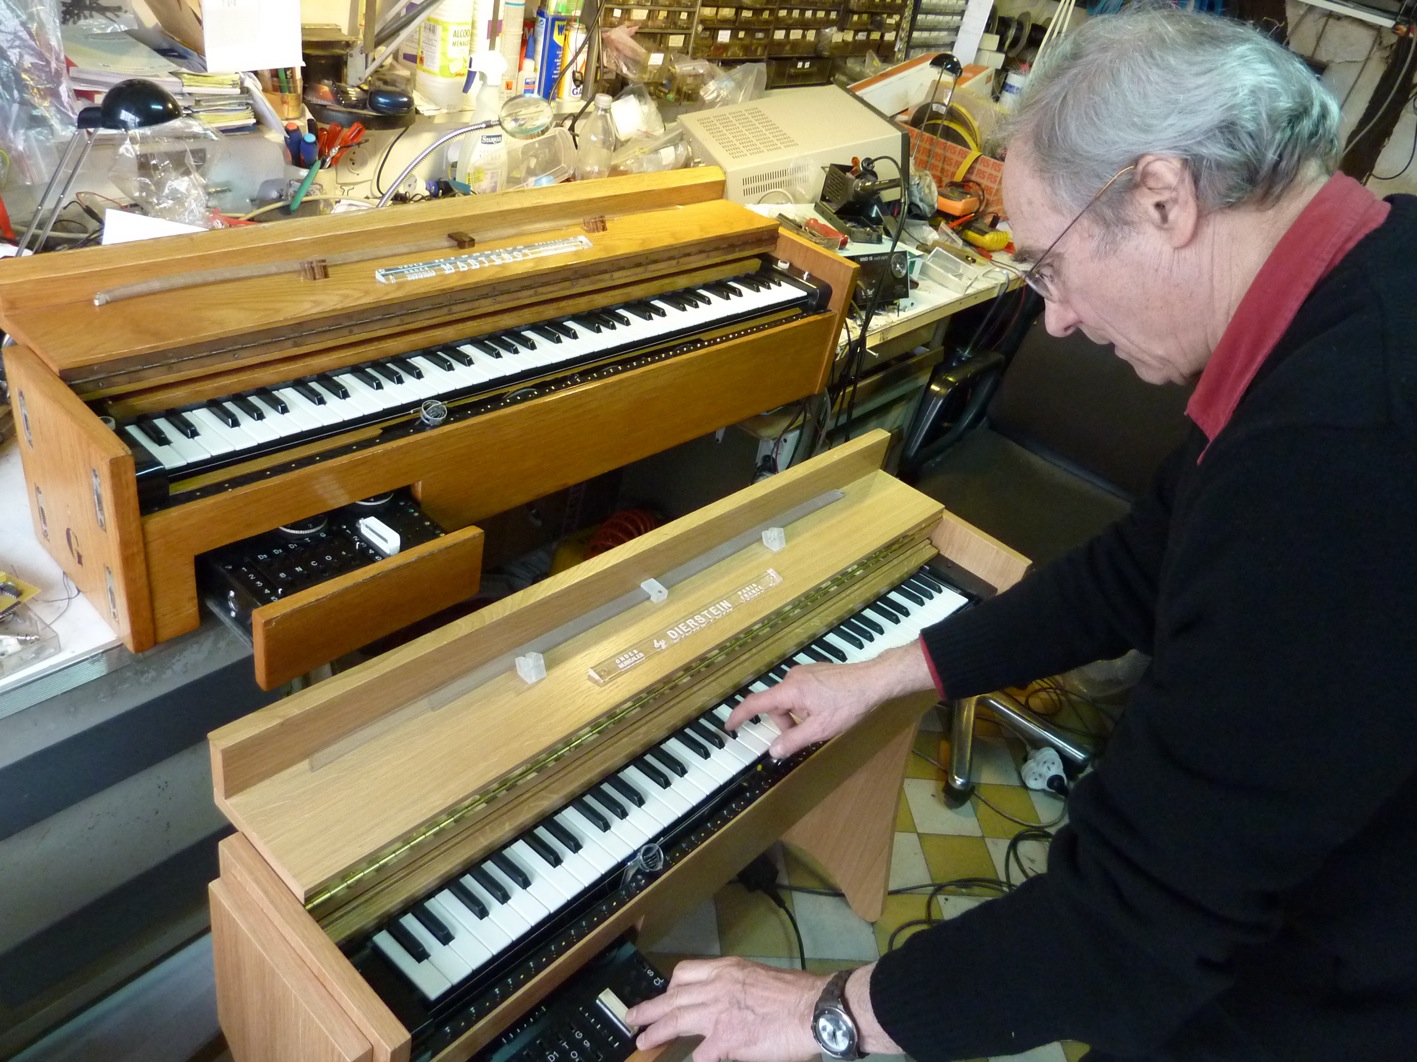 ondes musicales by Jean-Loup Dierstein and Thomas Bloch's original ondes Martenot